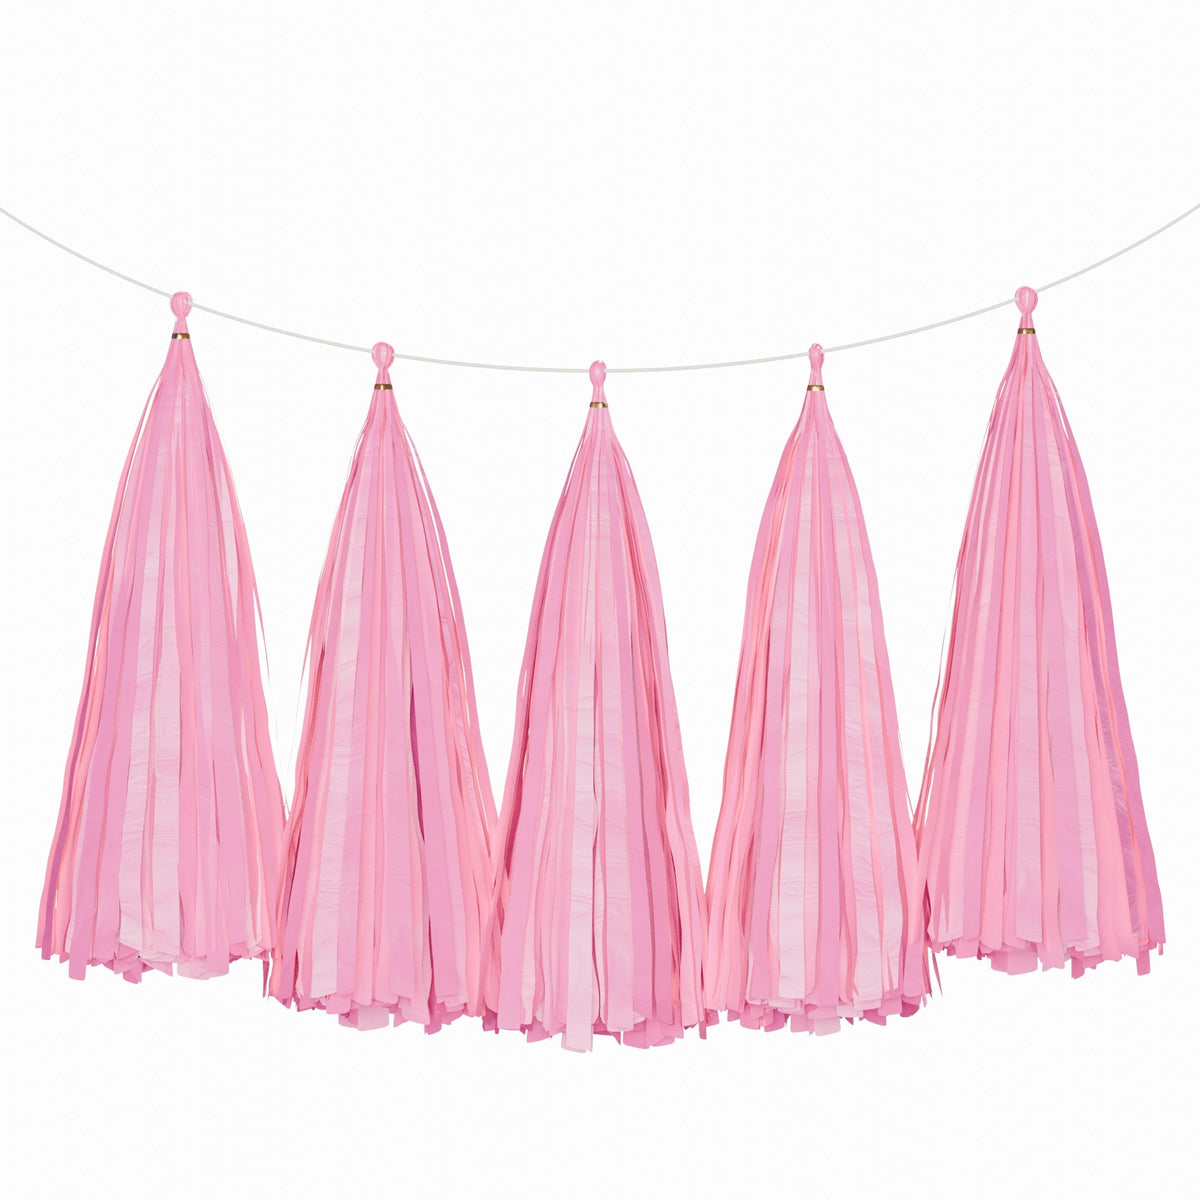 Weifang Mayshine Imp&exp co Decorations Pink Tassel Garland, 5 Count 810064197079